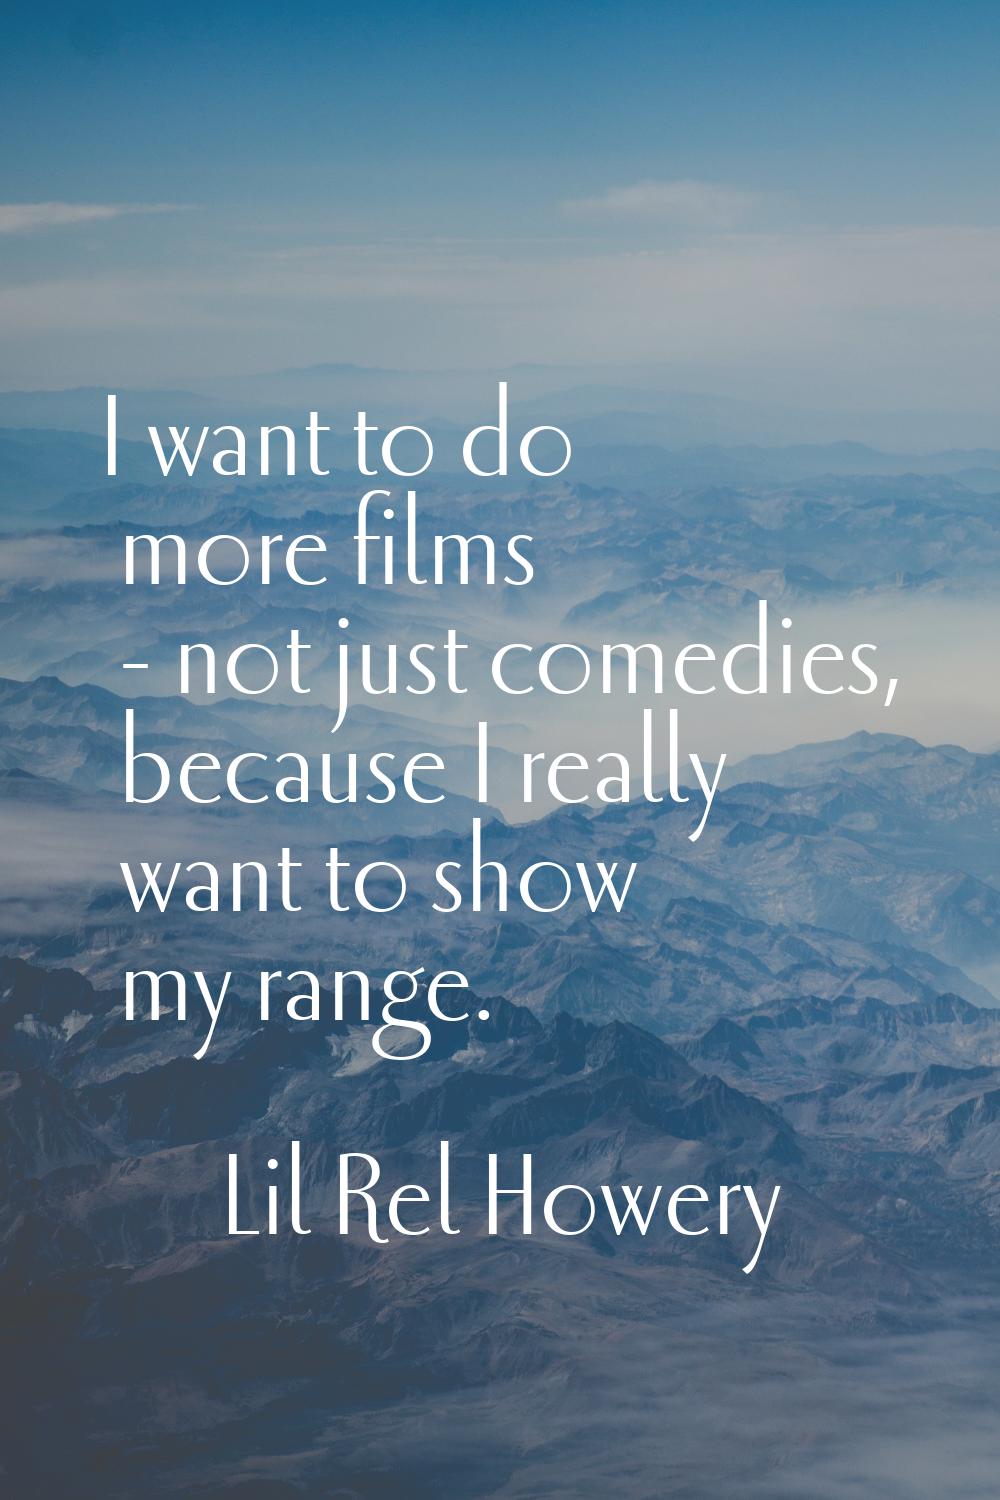 I want to do more films - not just comedies, because I really want to show my range.